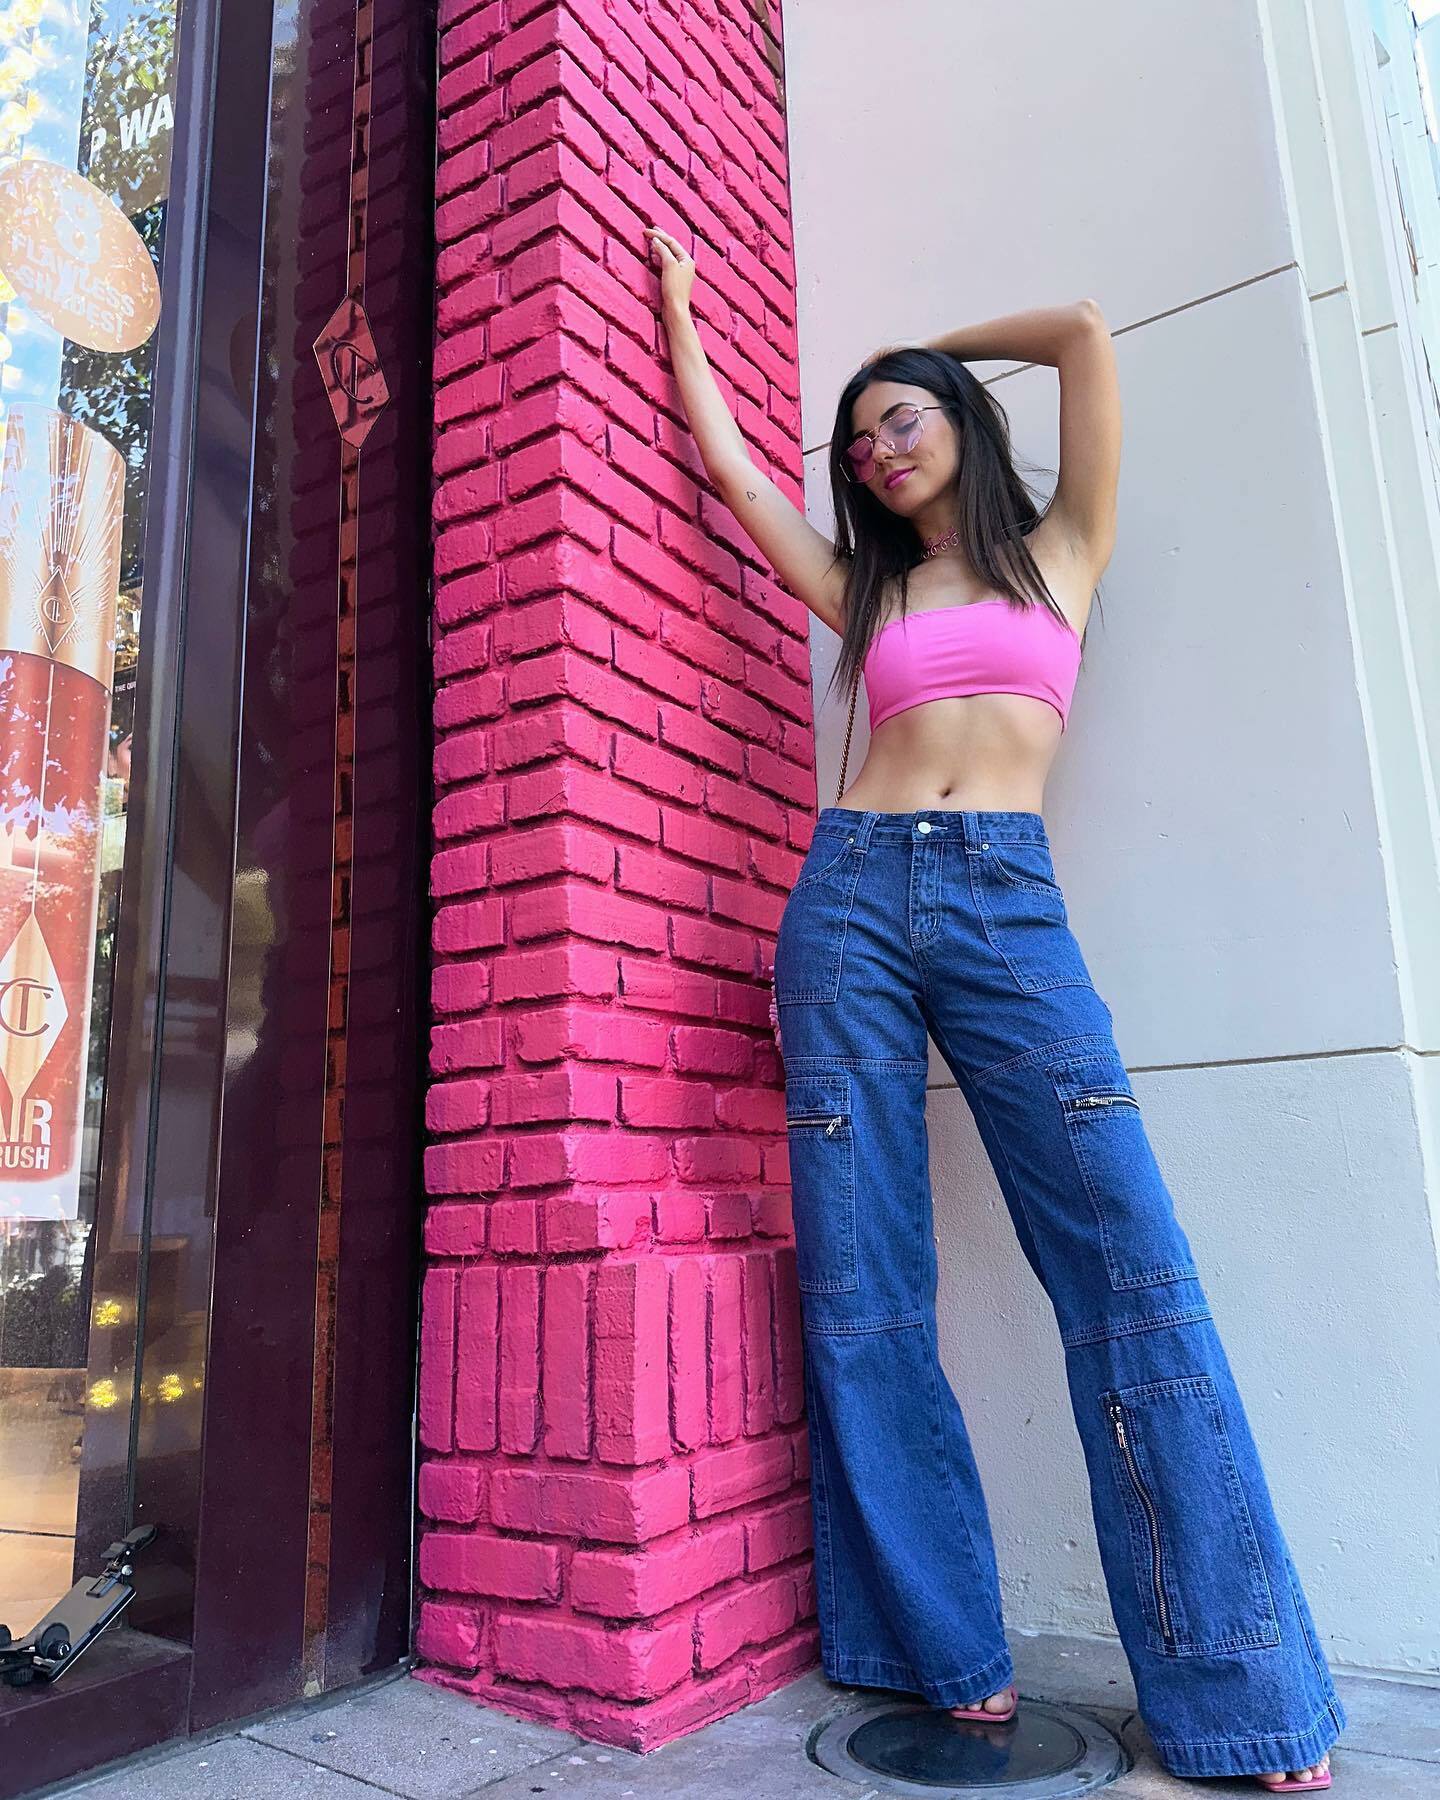 Victoria Justice Channels Her Inner Barbie Girl! - Photo 1